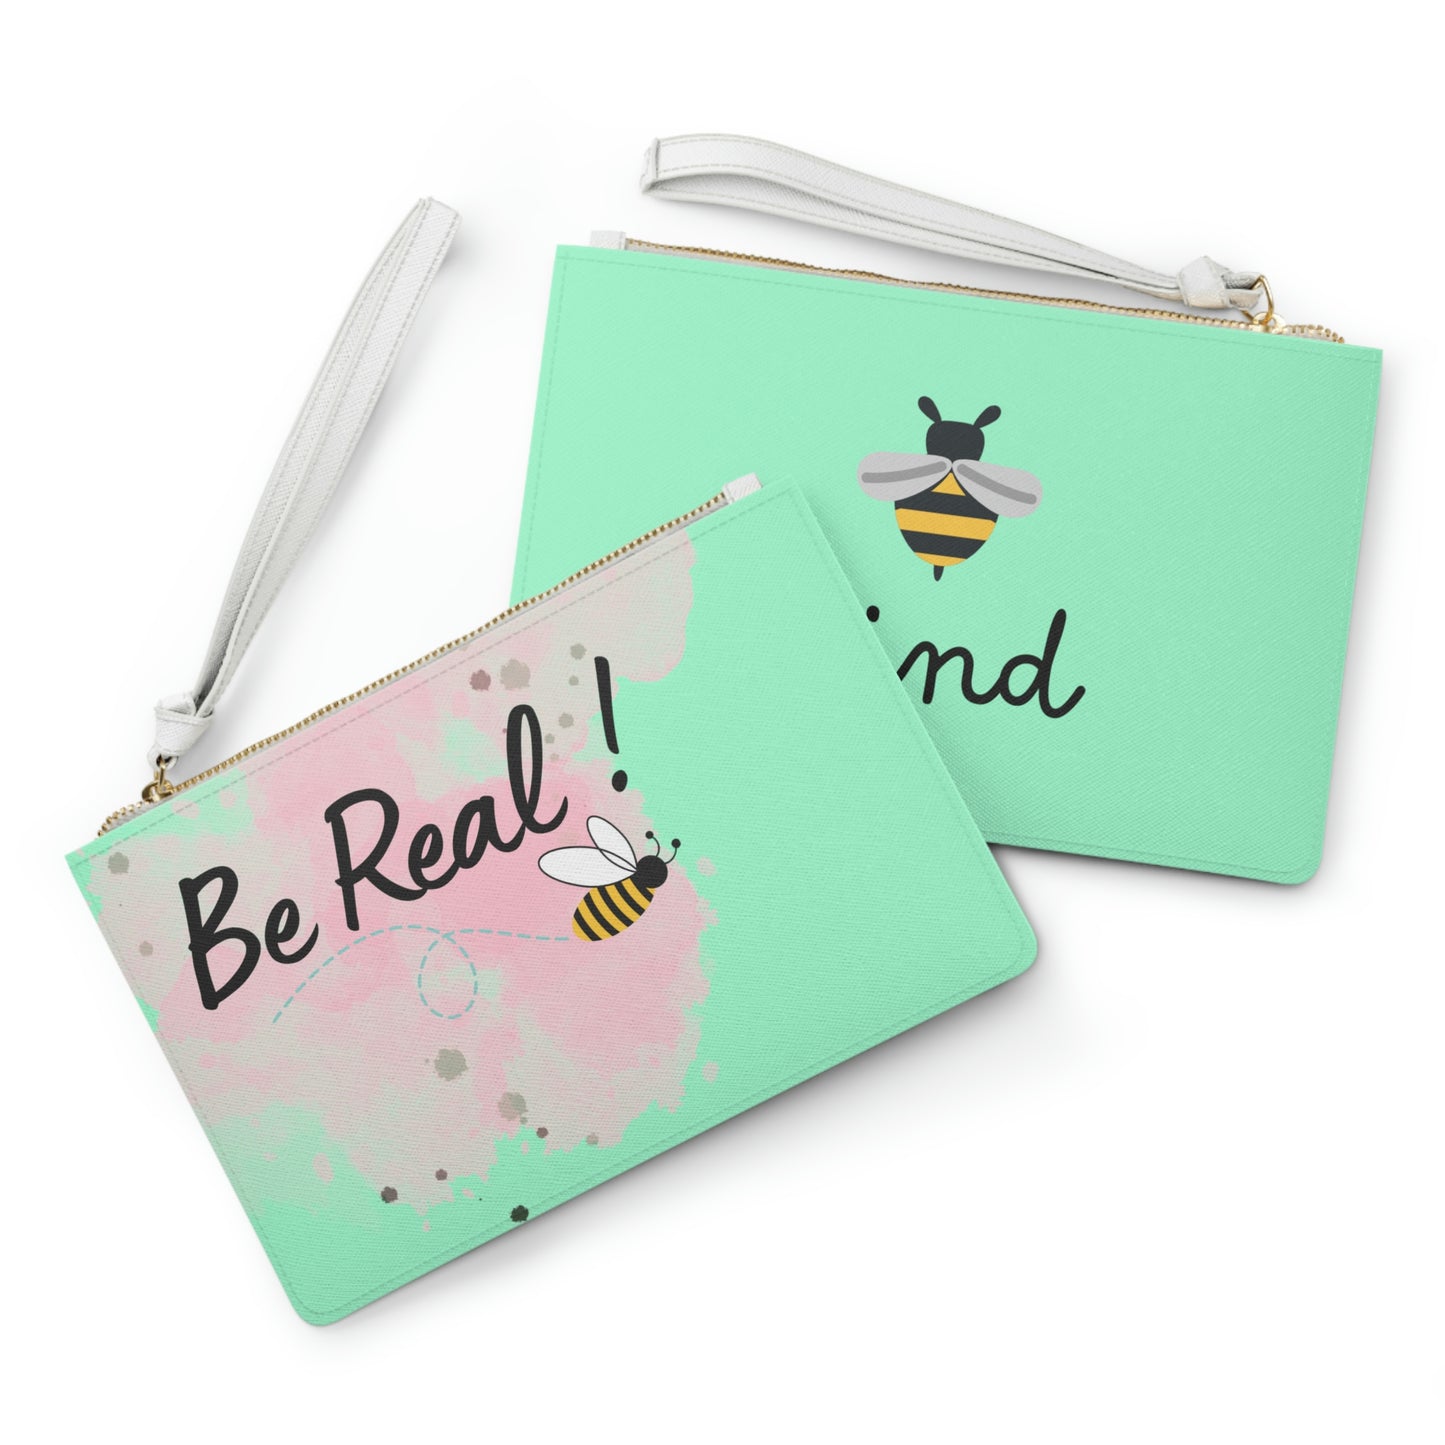 Be Real Bee Clutch Bag | BKLA | Shoes & Accessories | shoes, hats, phone covers, tote bags, clutch bags